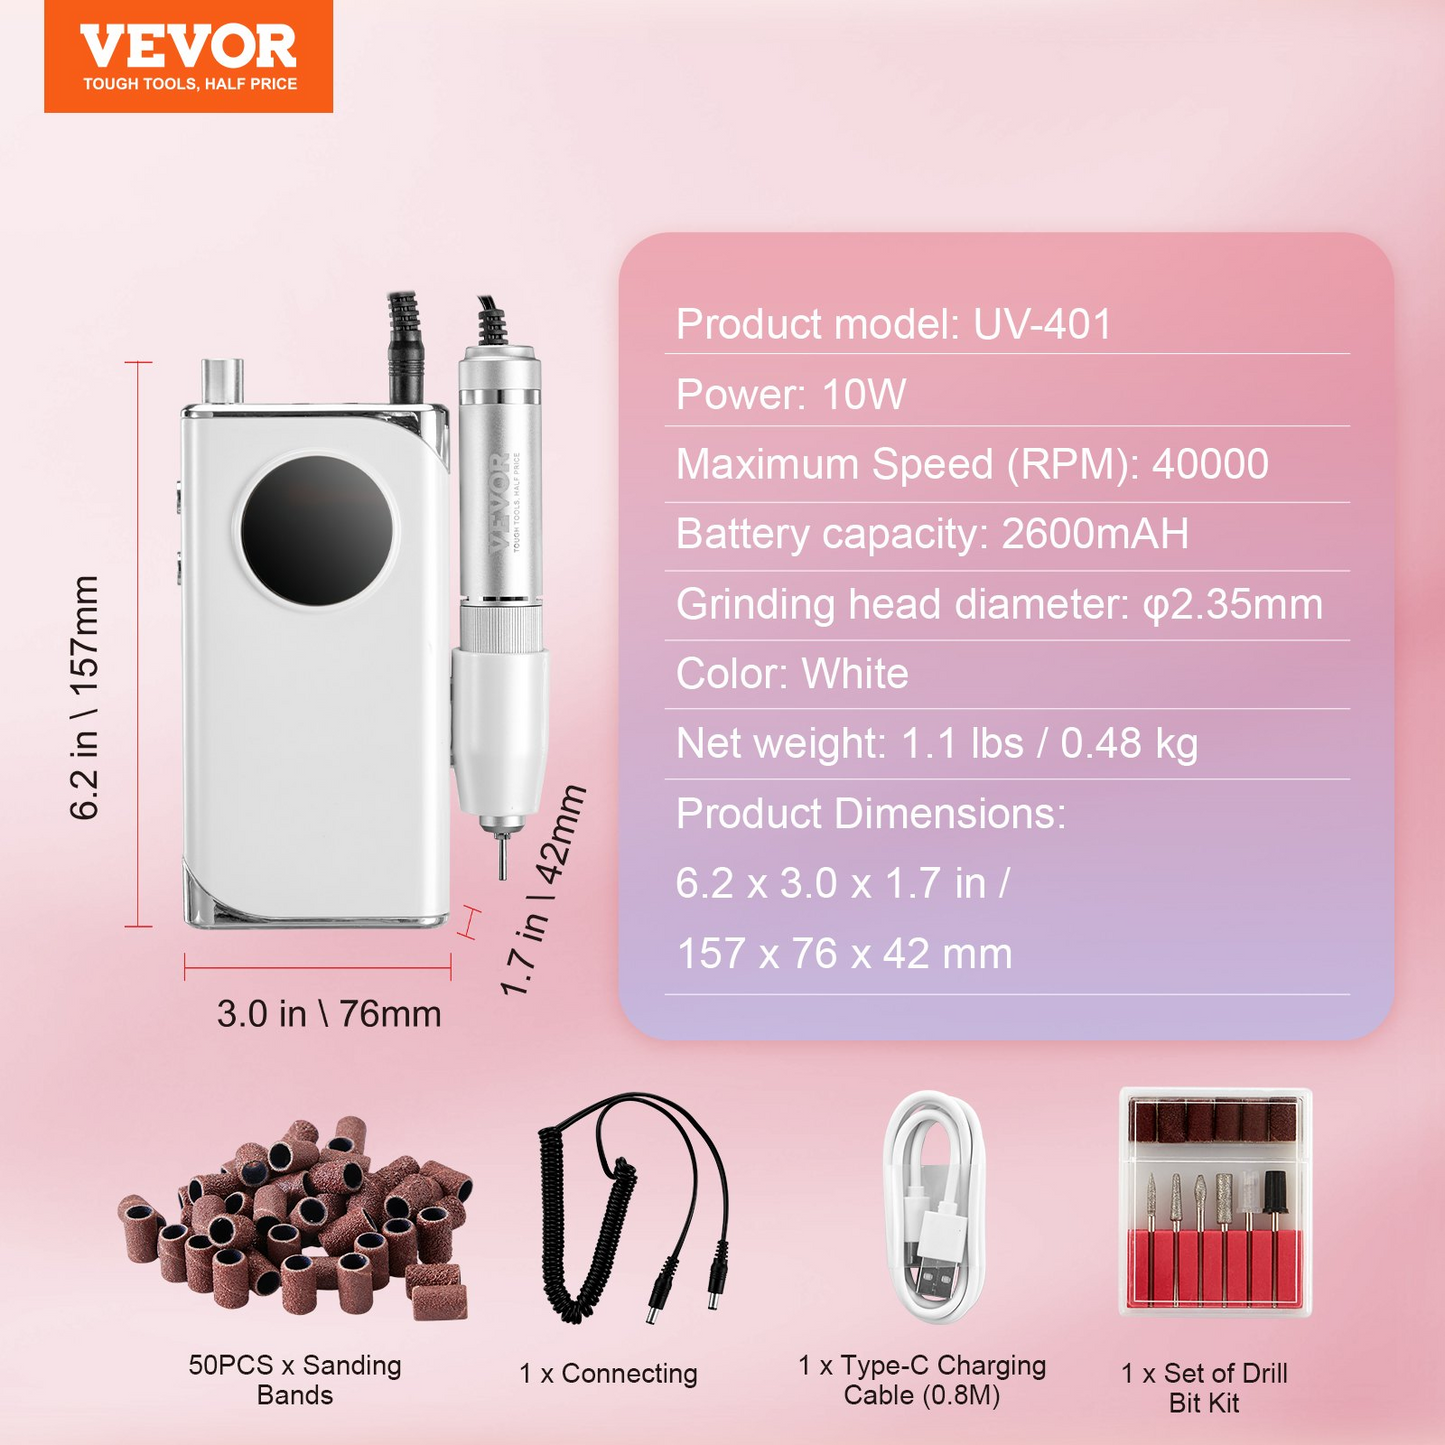 VEVOR Electric Rechargeable Nail Drill, 40,000RPM Portable Cordless Nail E File Machine, LCD-Display Acrylic Gel Grinder Tool with 6 Bits and 50PCS Sanding Bands for Manicure Pedicure Carve Polish, Goodies N Stuff